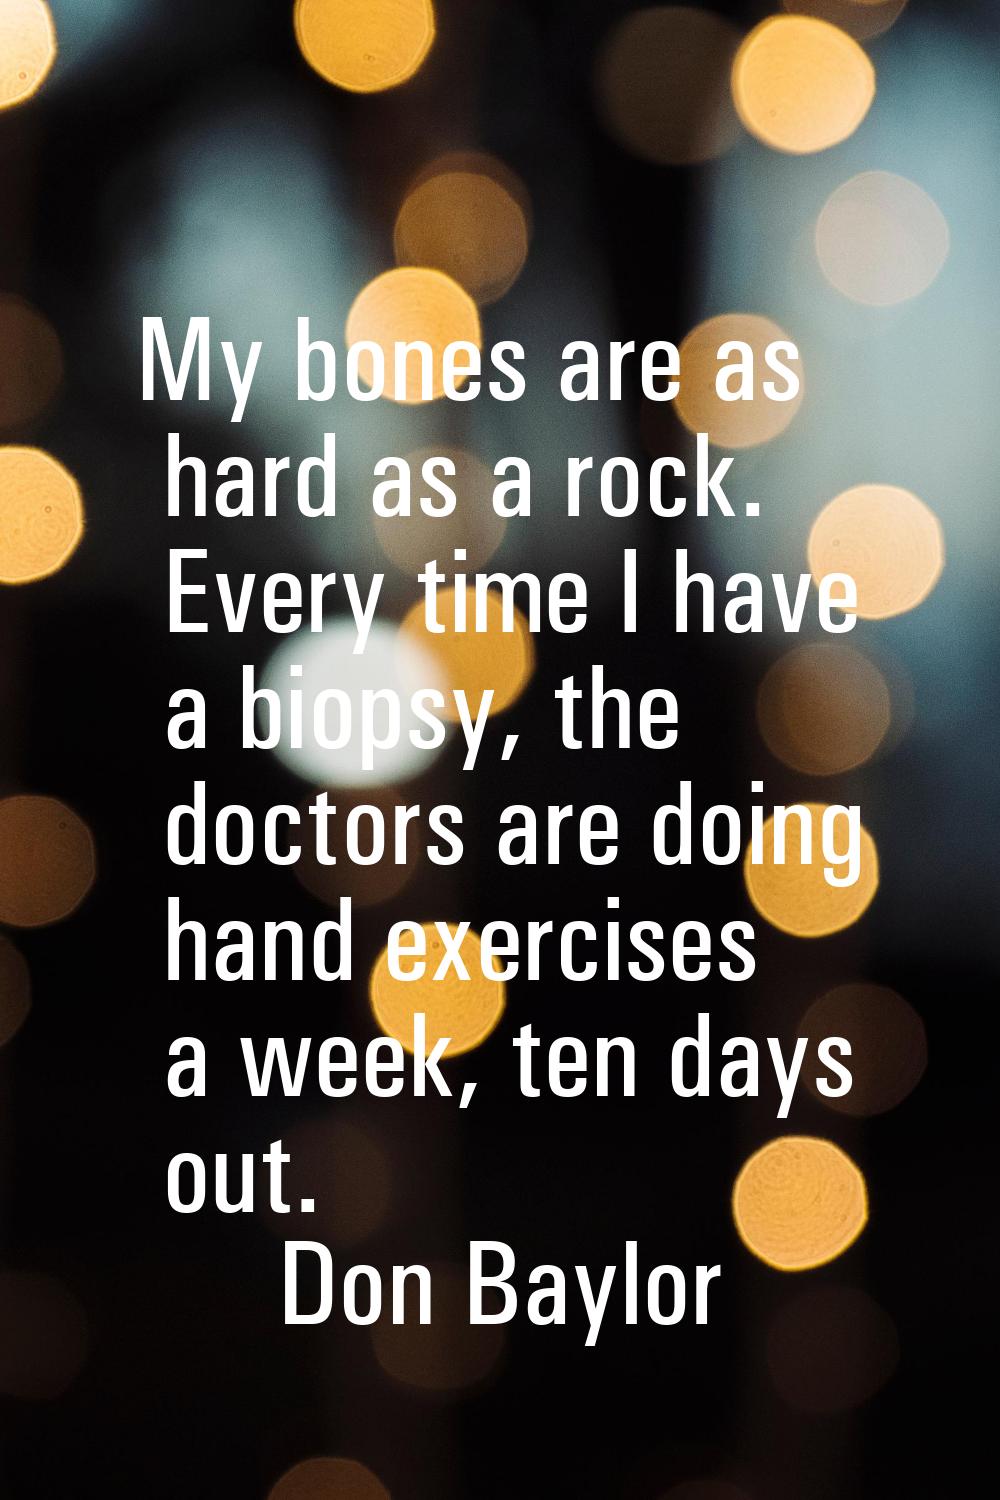 My bones are as hard as a rock. Every time I have a biopsy, the doctors are doing hand exercises a 